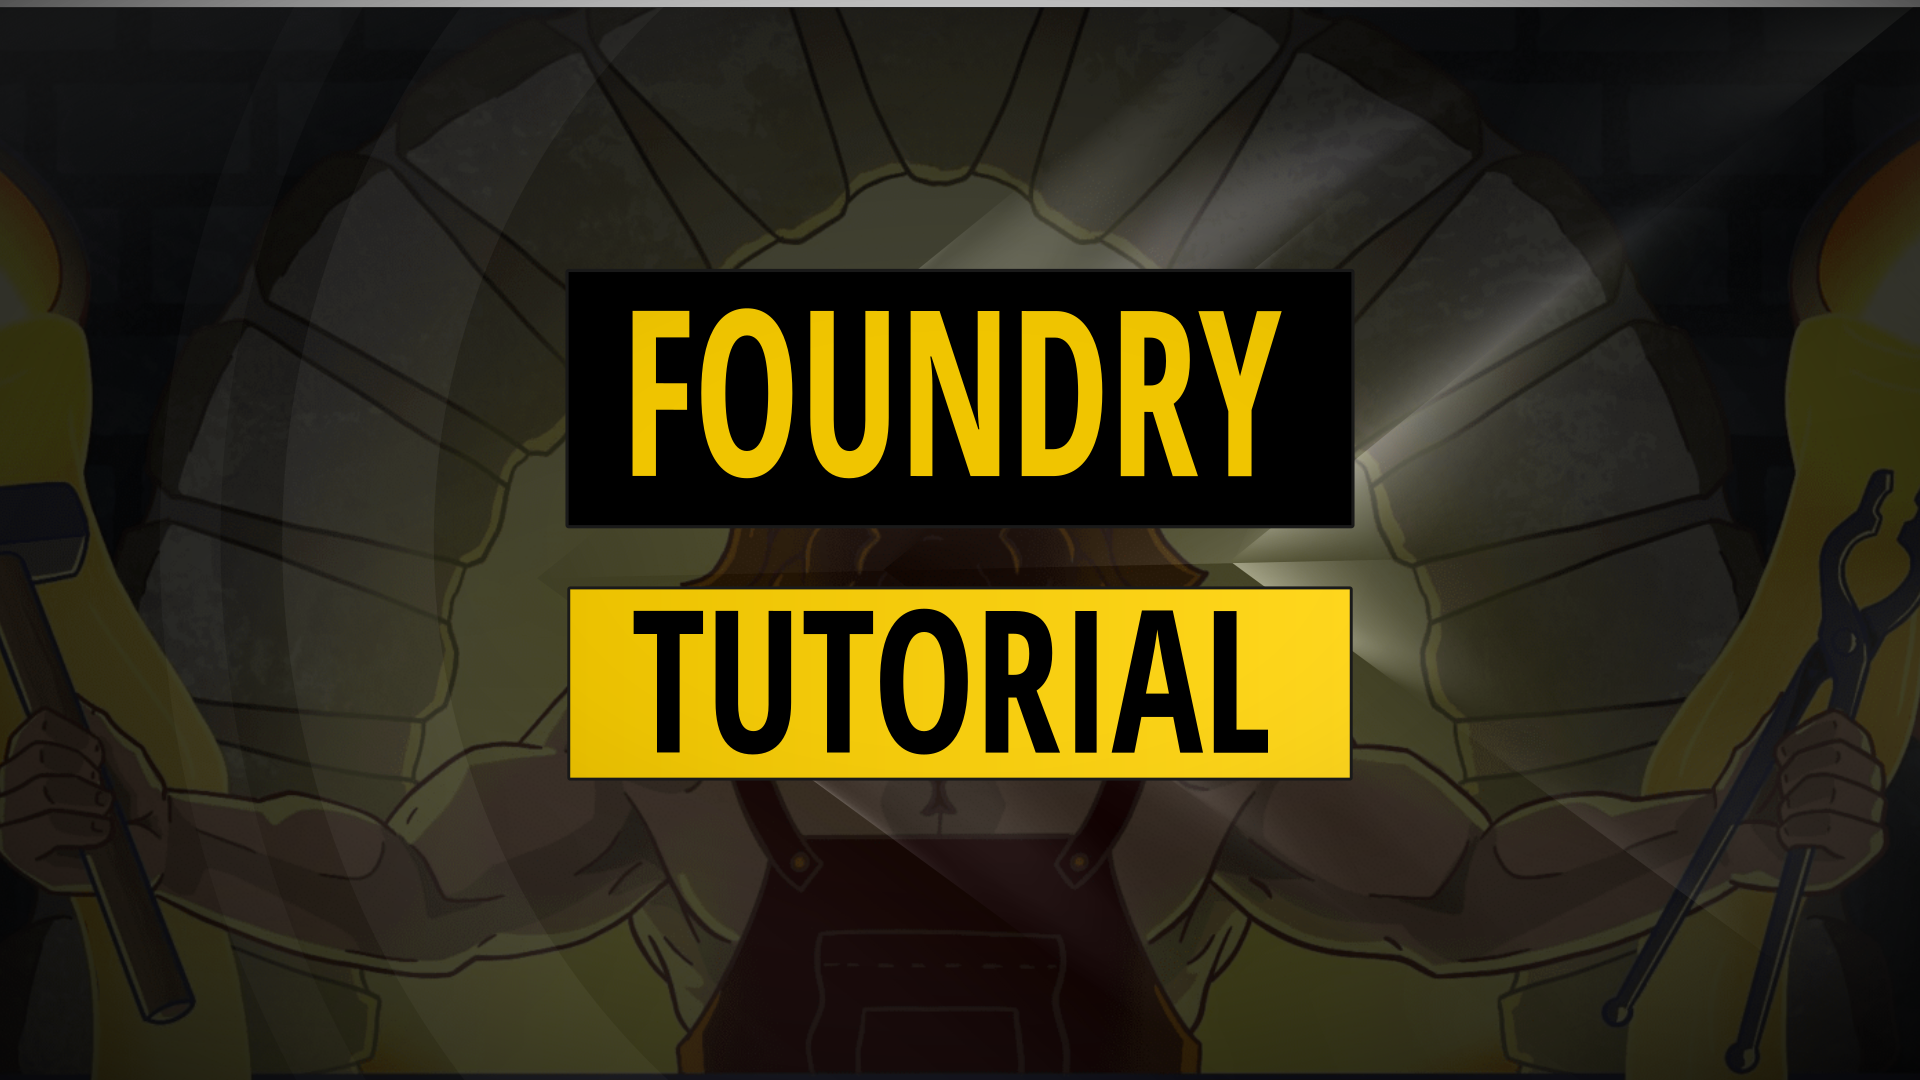 Foundry Tutorial | How To Debug & Deploy Solidity Smart Contracts